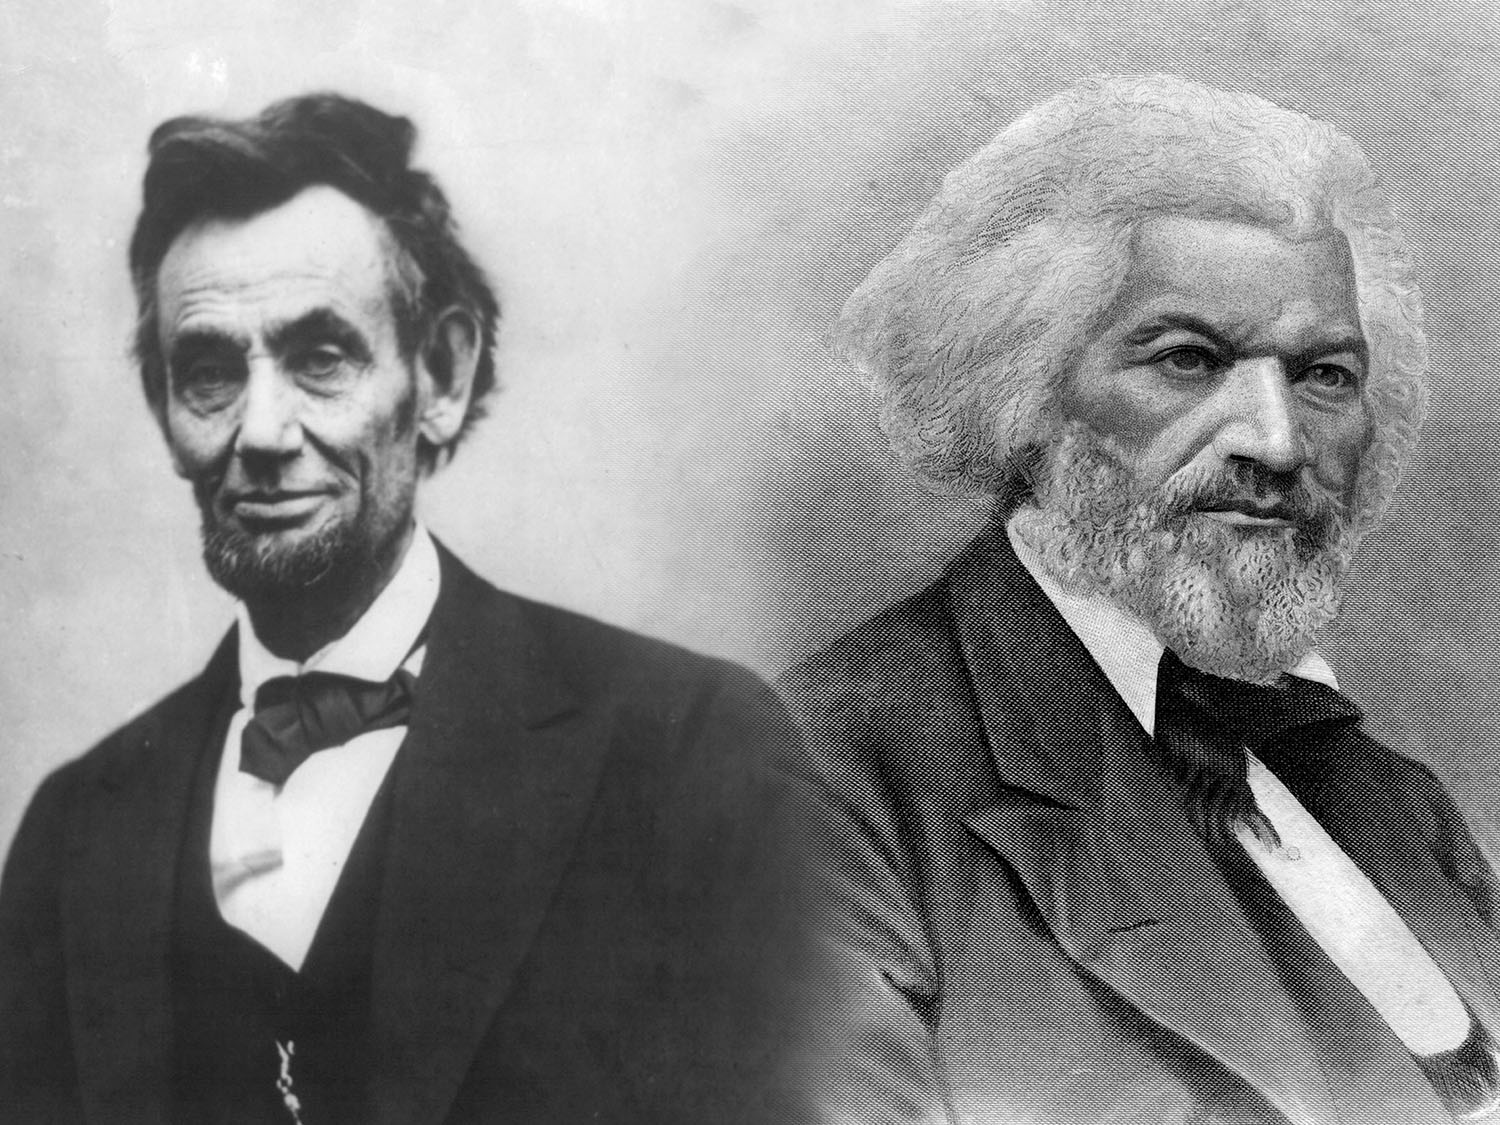 Abraham Lincoln and Frederick Douglass: A Compare and Contrast Lesson